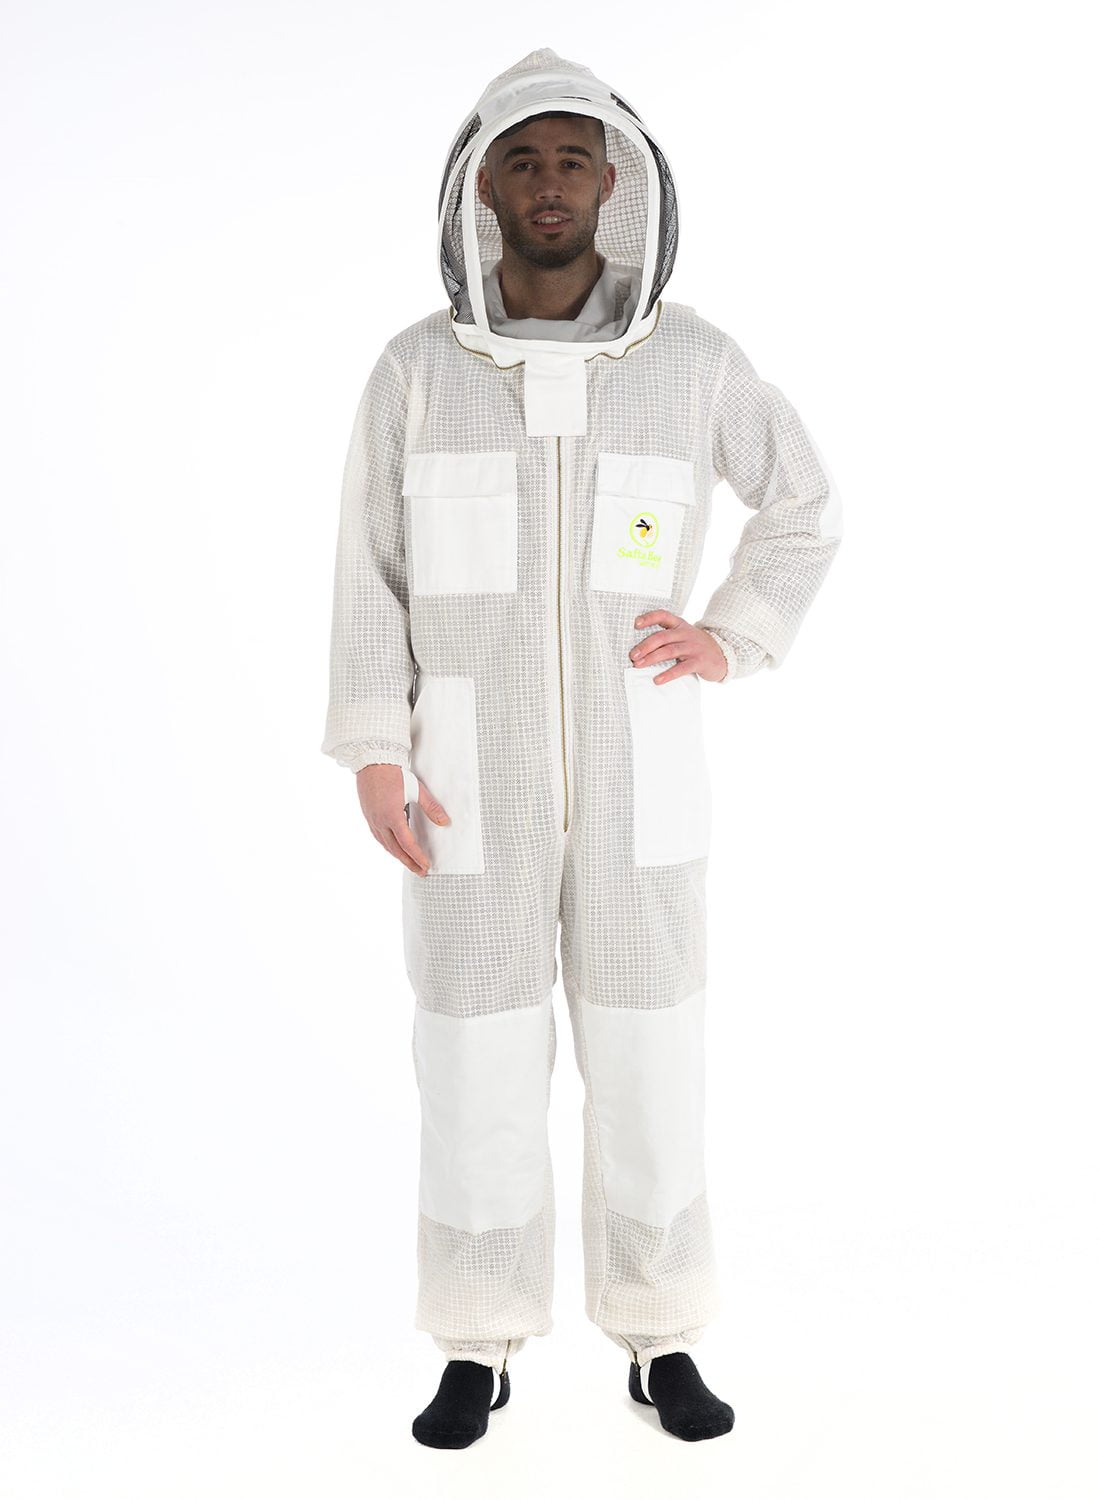 Details about   Ultra Ventilated 3 Layers Pilot Beekeeping Suit Extra Ordinary Features Size XL 